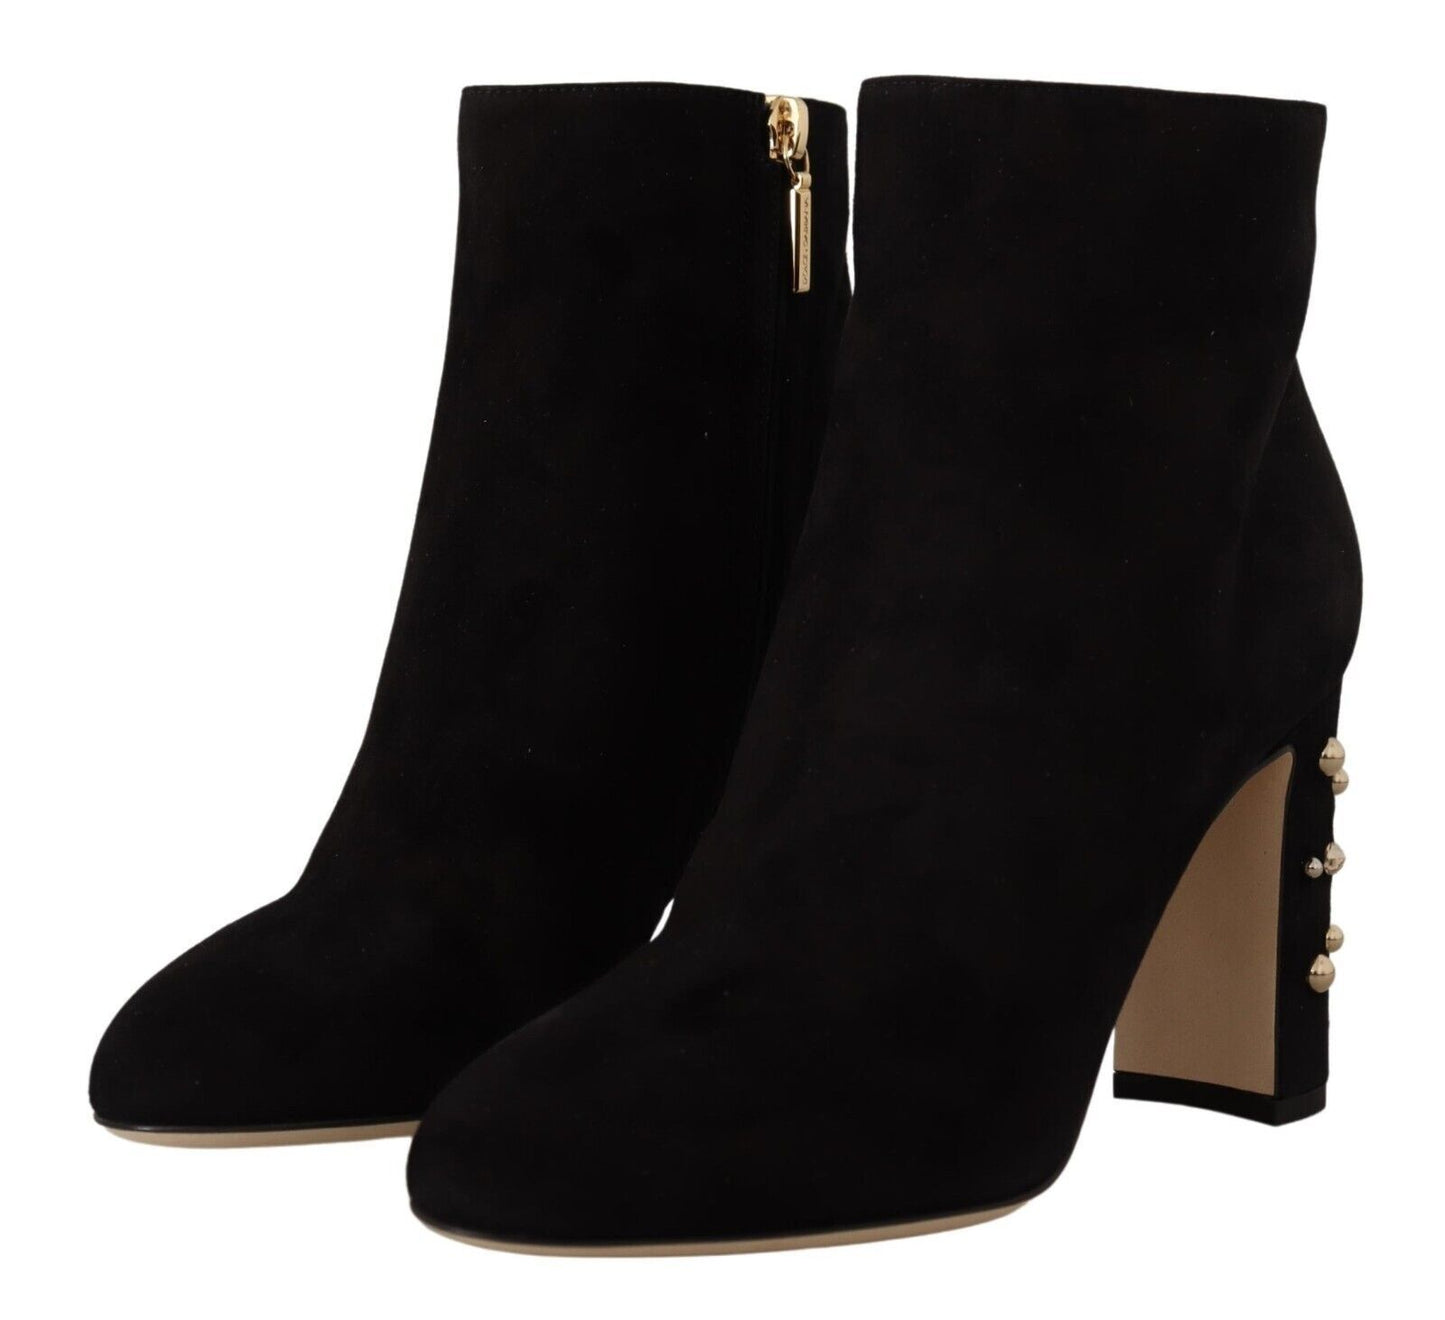 Elegant Suede Ankle Boots with Crystal Embellishment